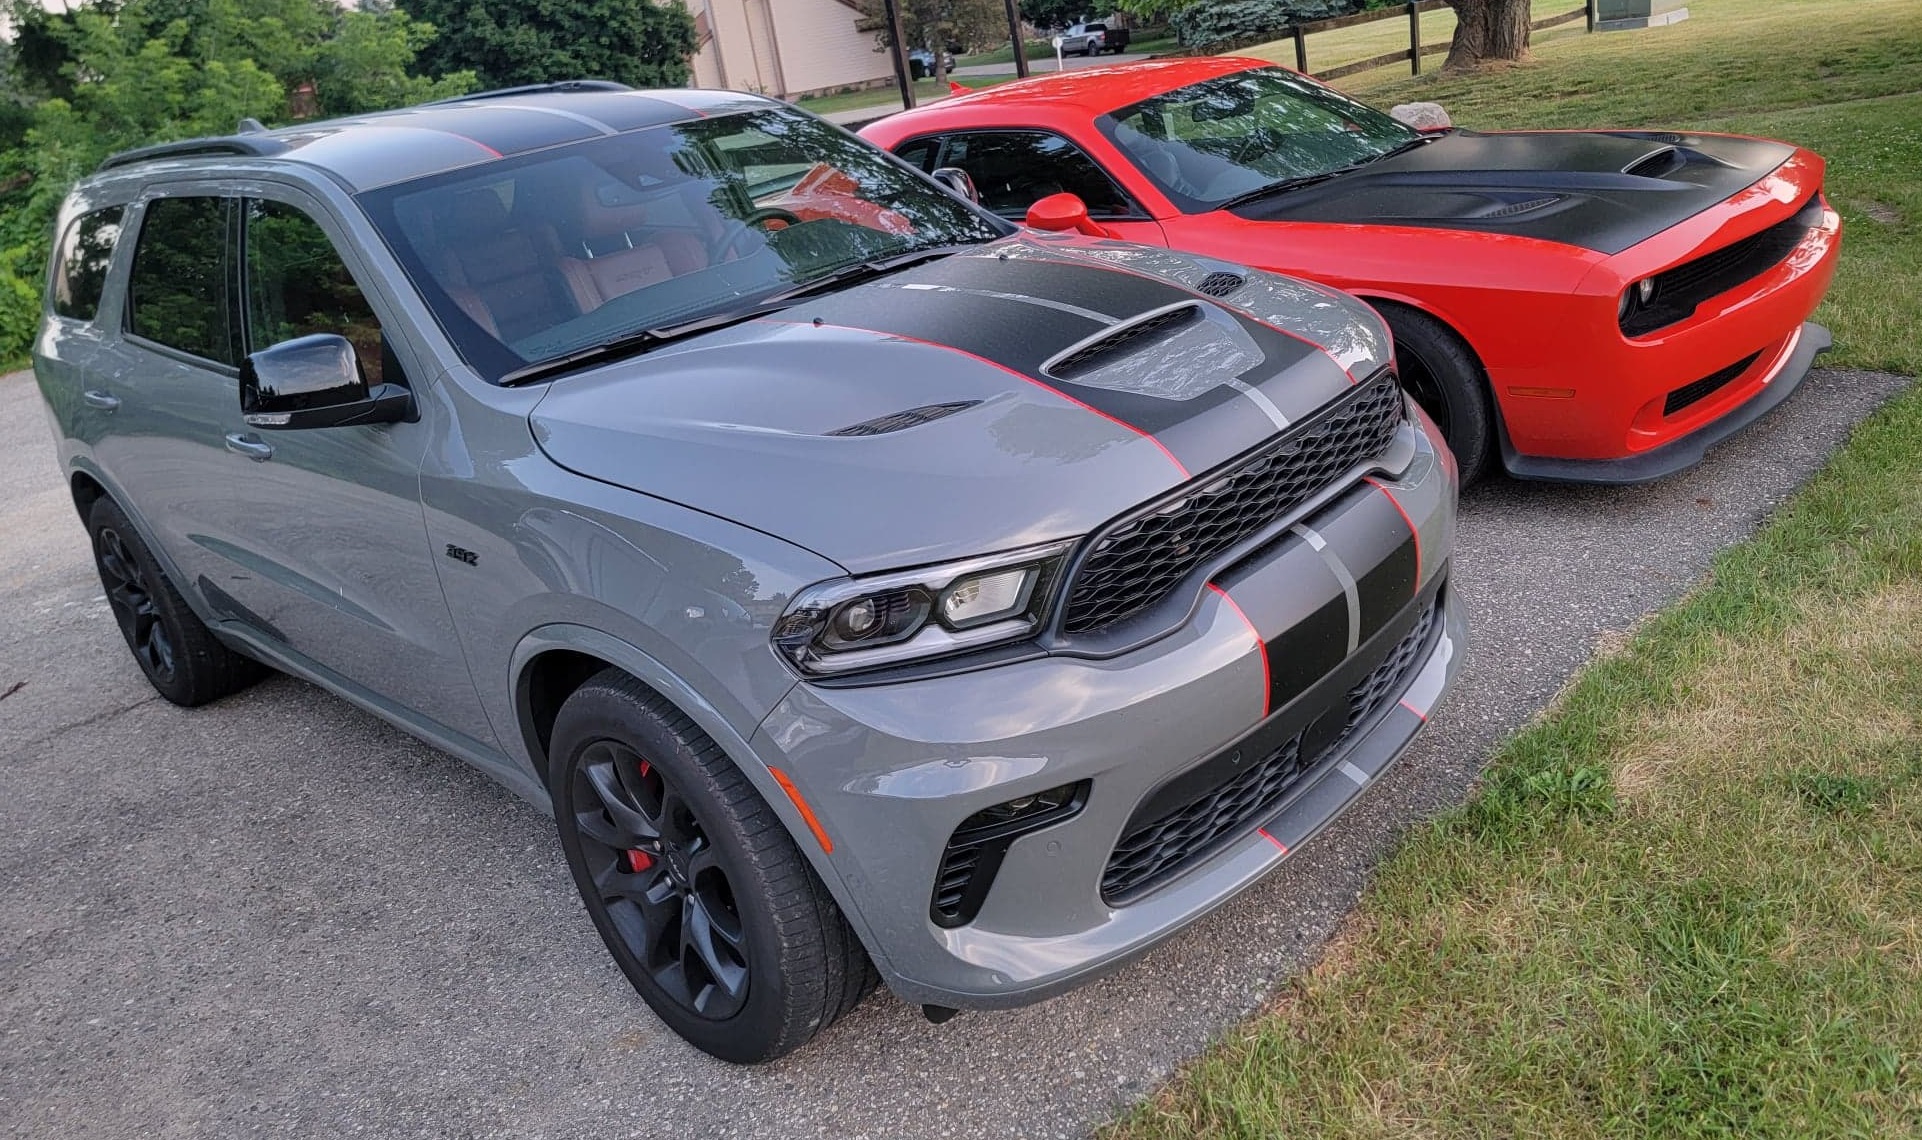 Dodge Durango SRT® 392 Review Great Around Town and on the Open Road